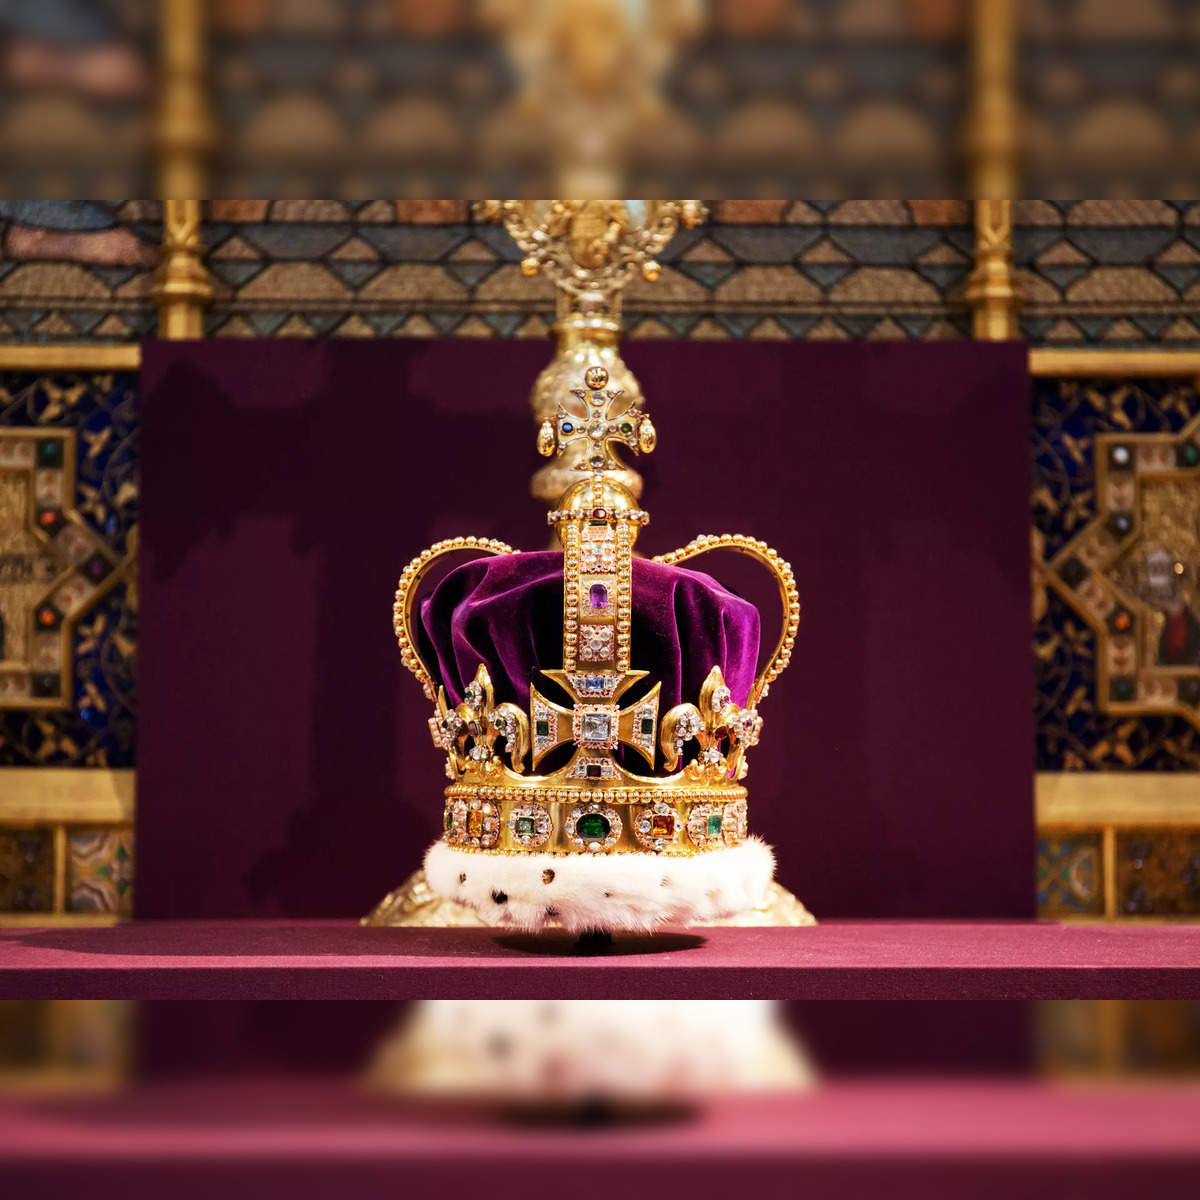 tower of london: Kohinoor display gets 'transparent' makeover at Tower of  London - The Economic Times